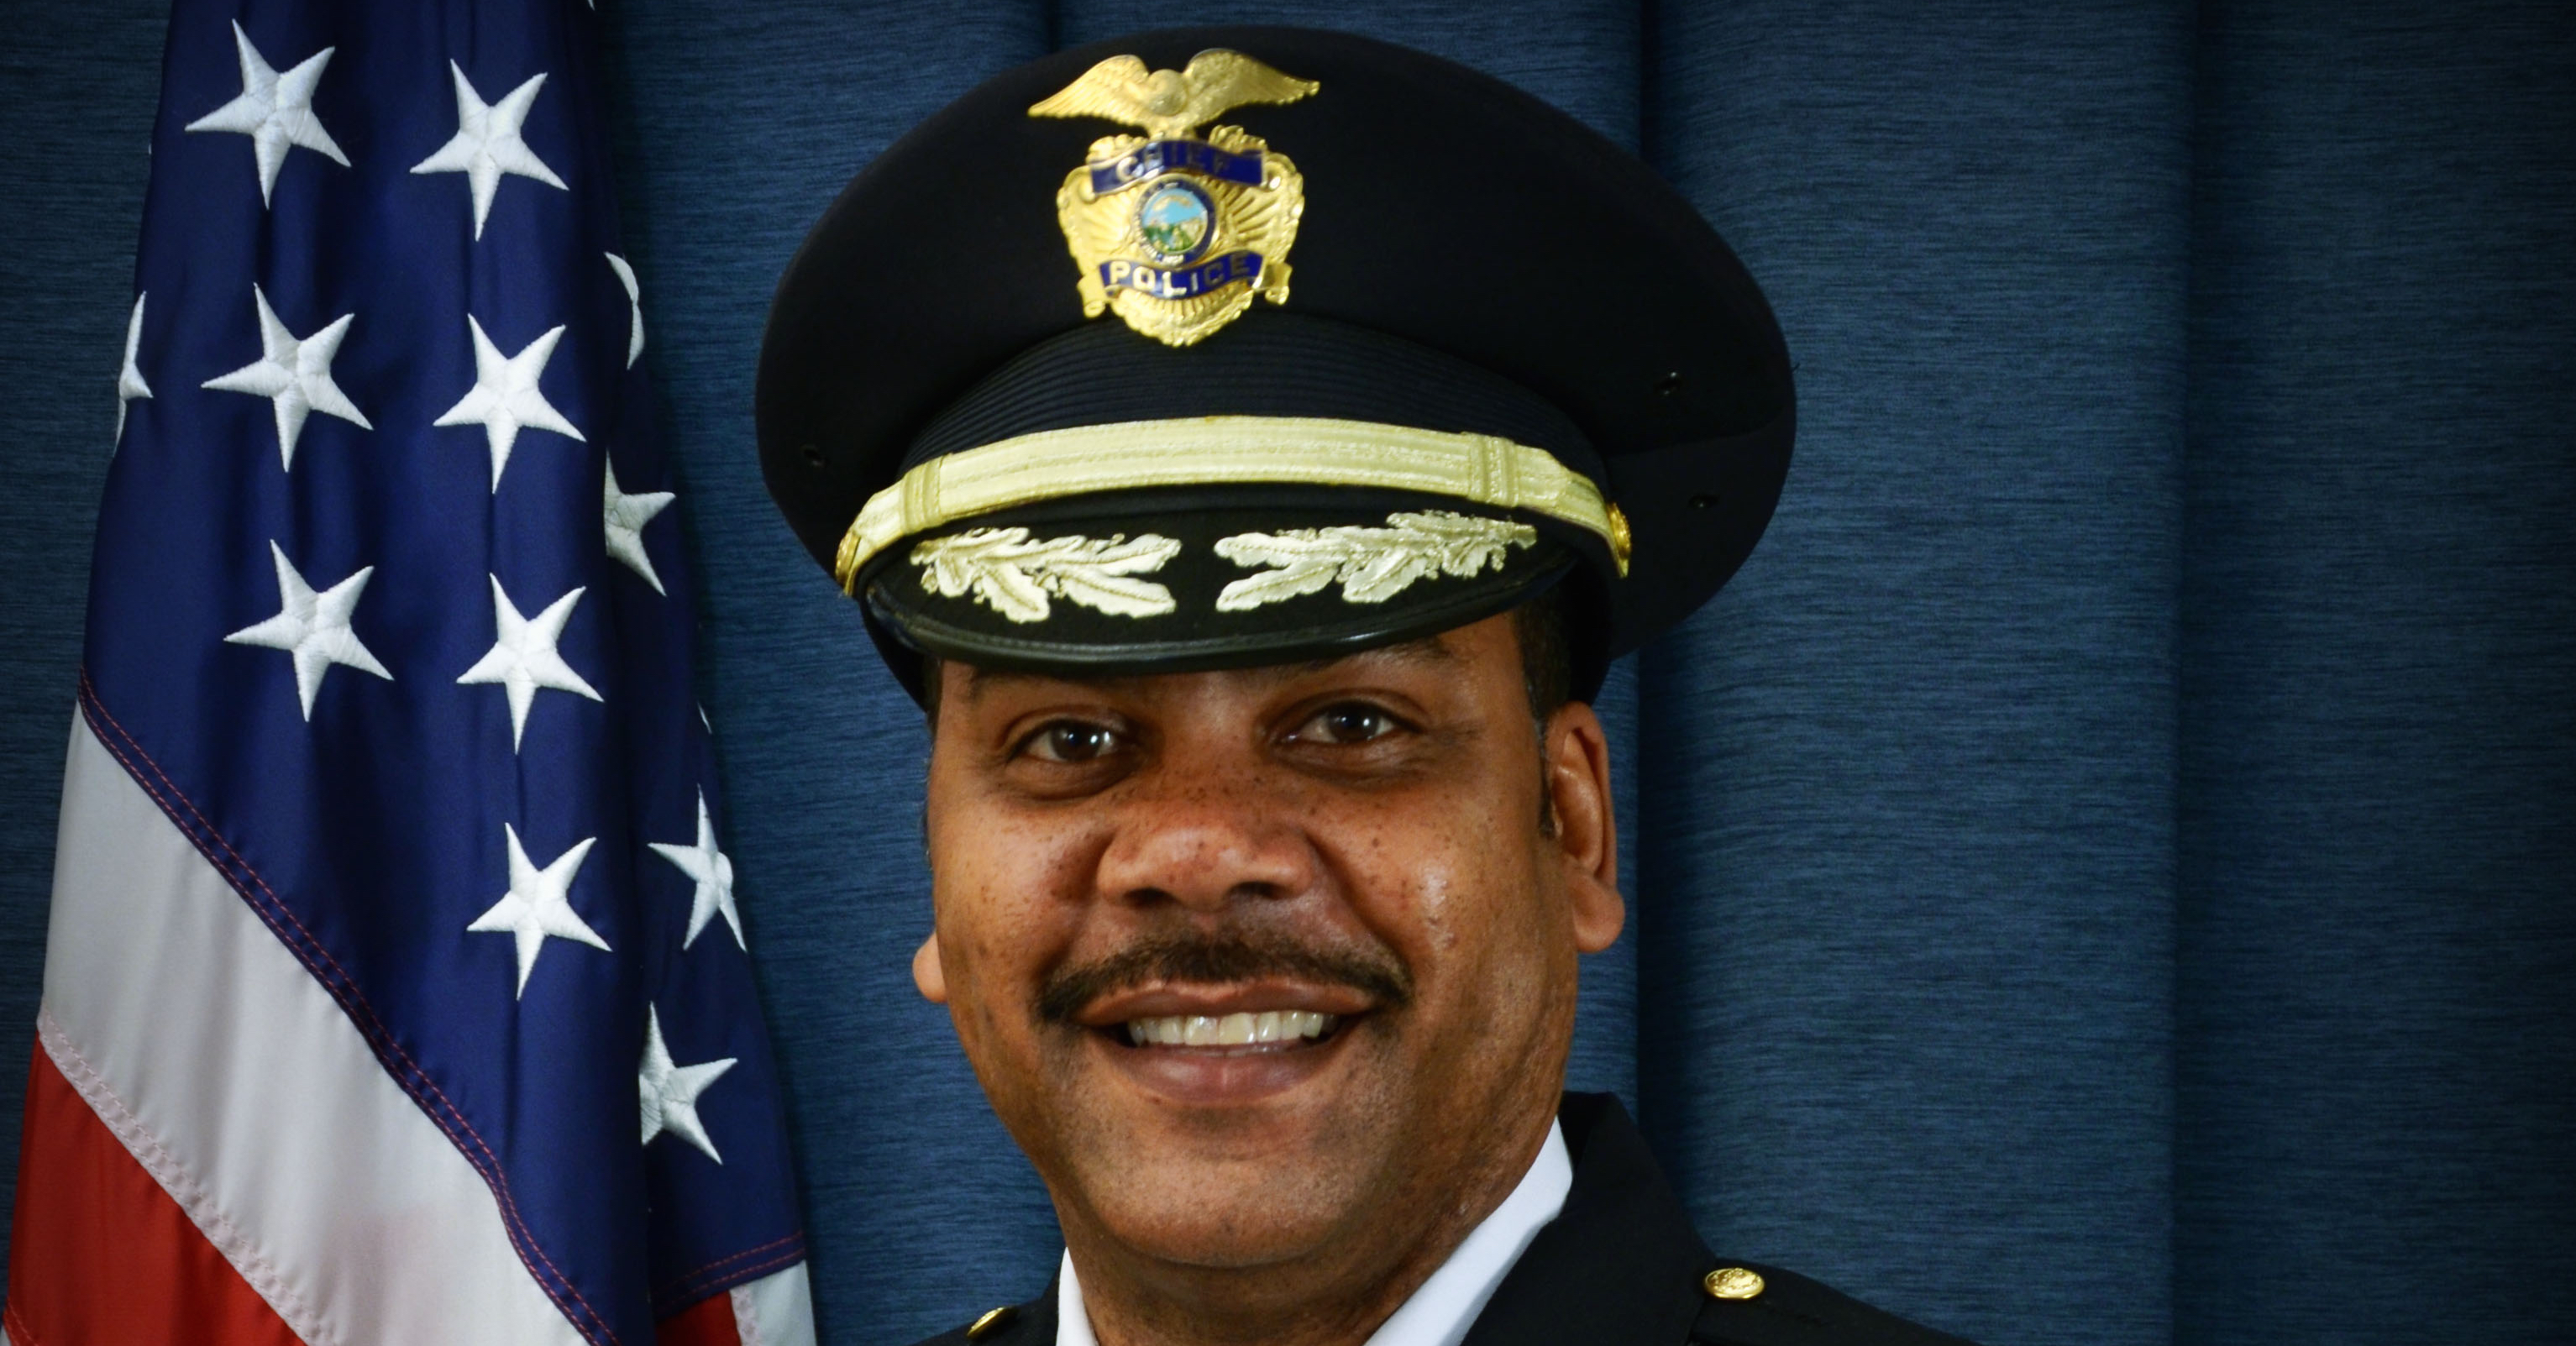 St. Cloud Police Chief William Blair Anderson